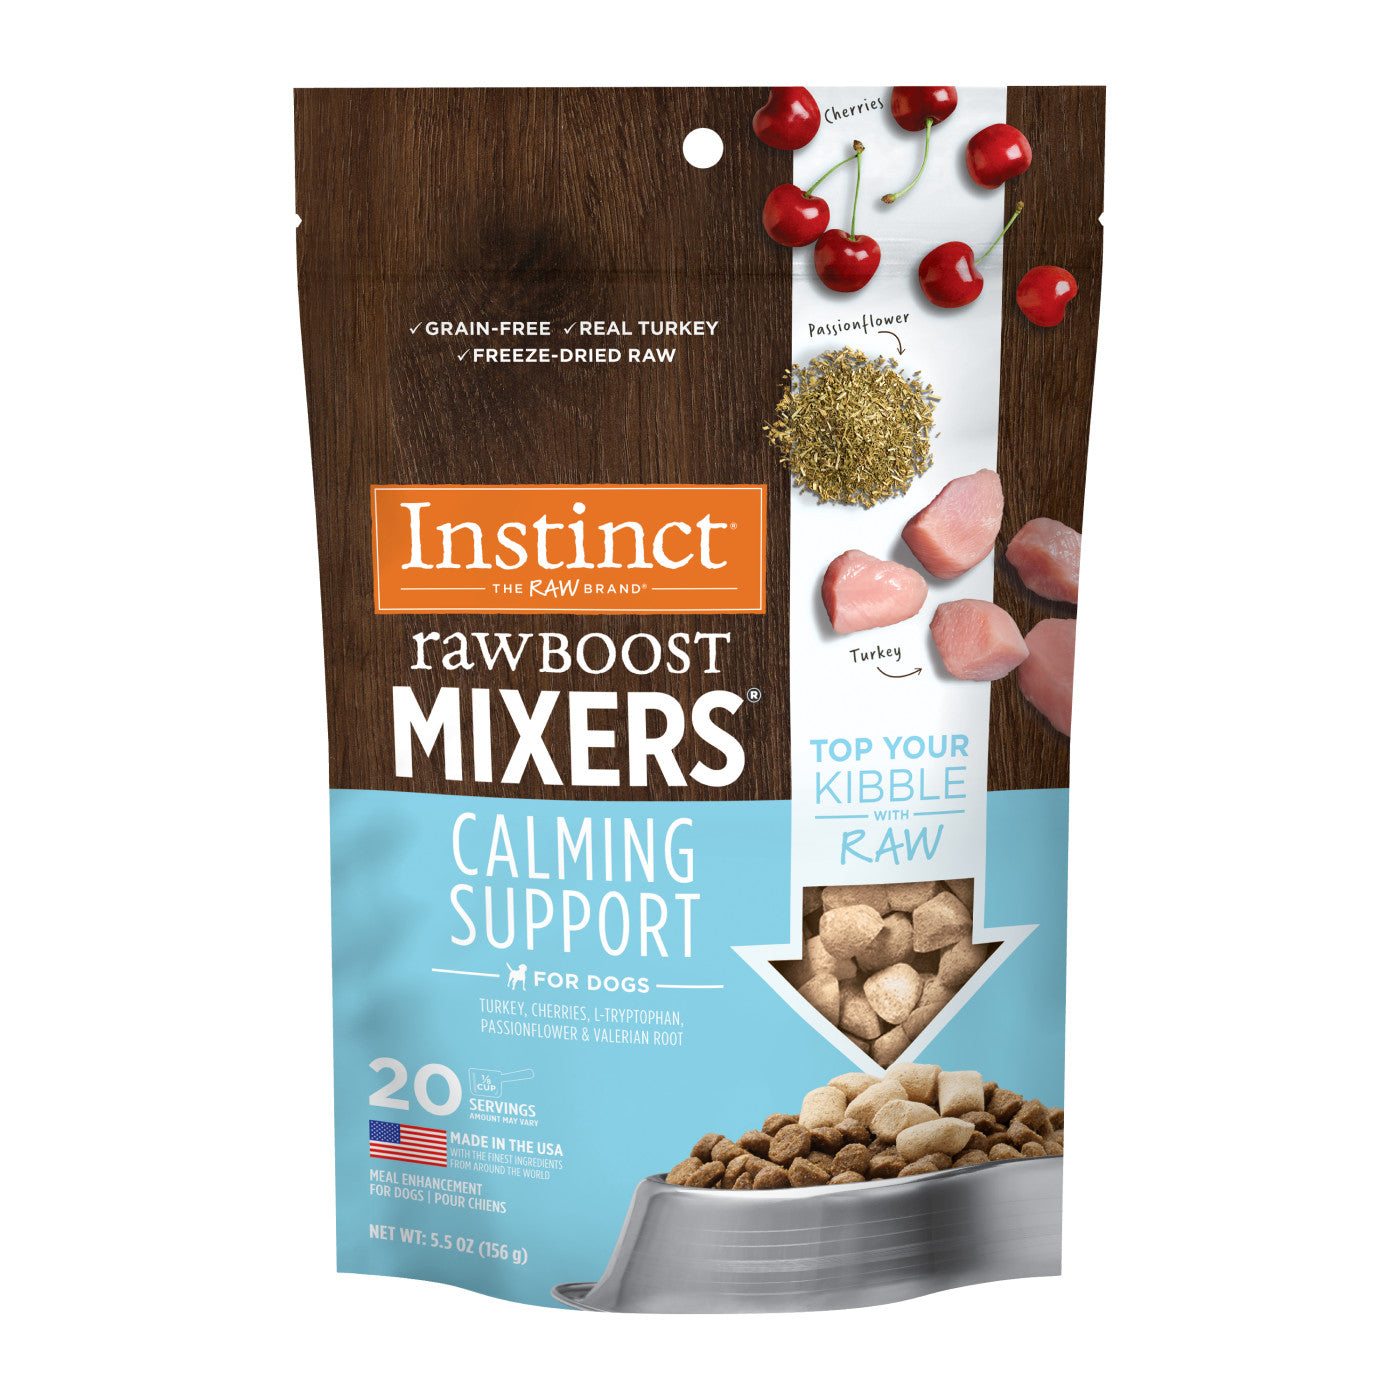 Instinct - Raw Boost Mixers - Calming Support (For Dogs)